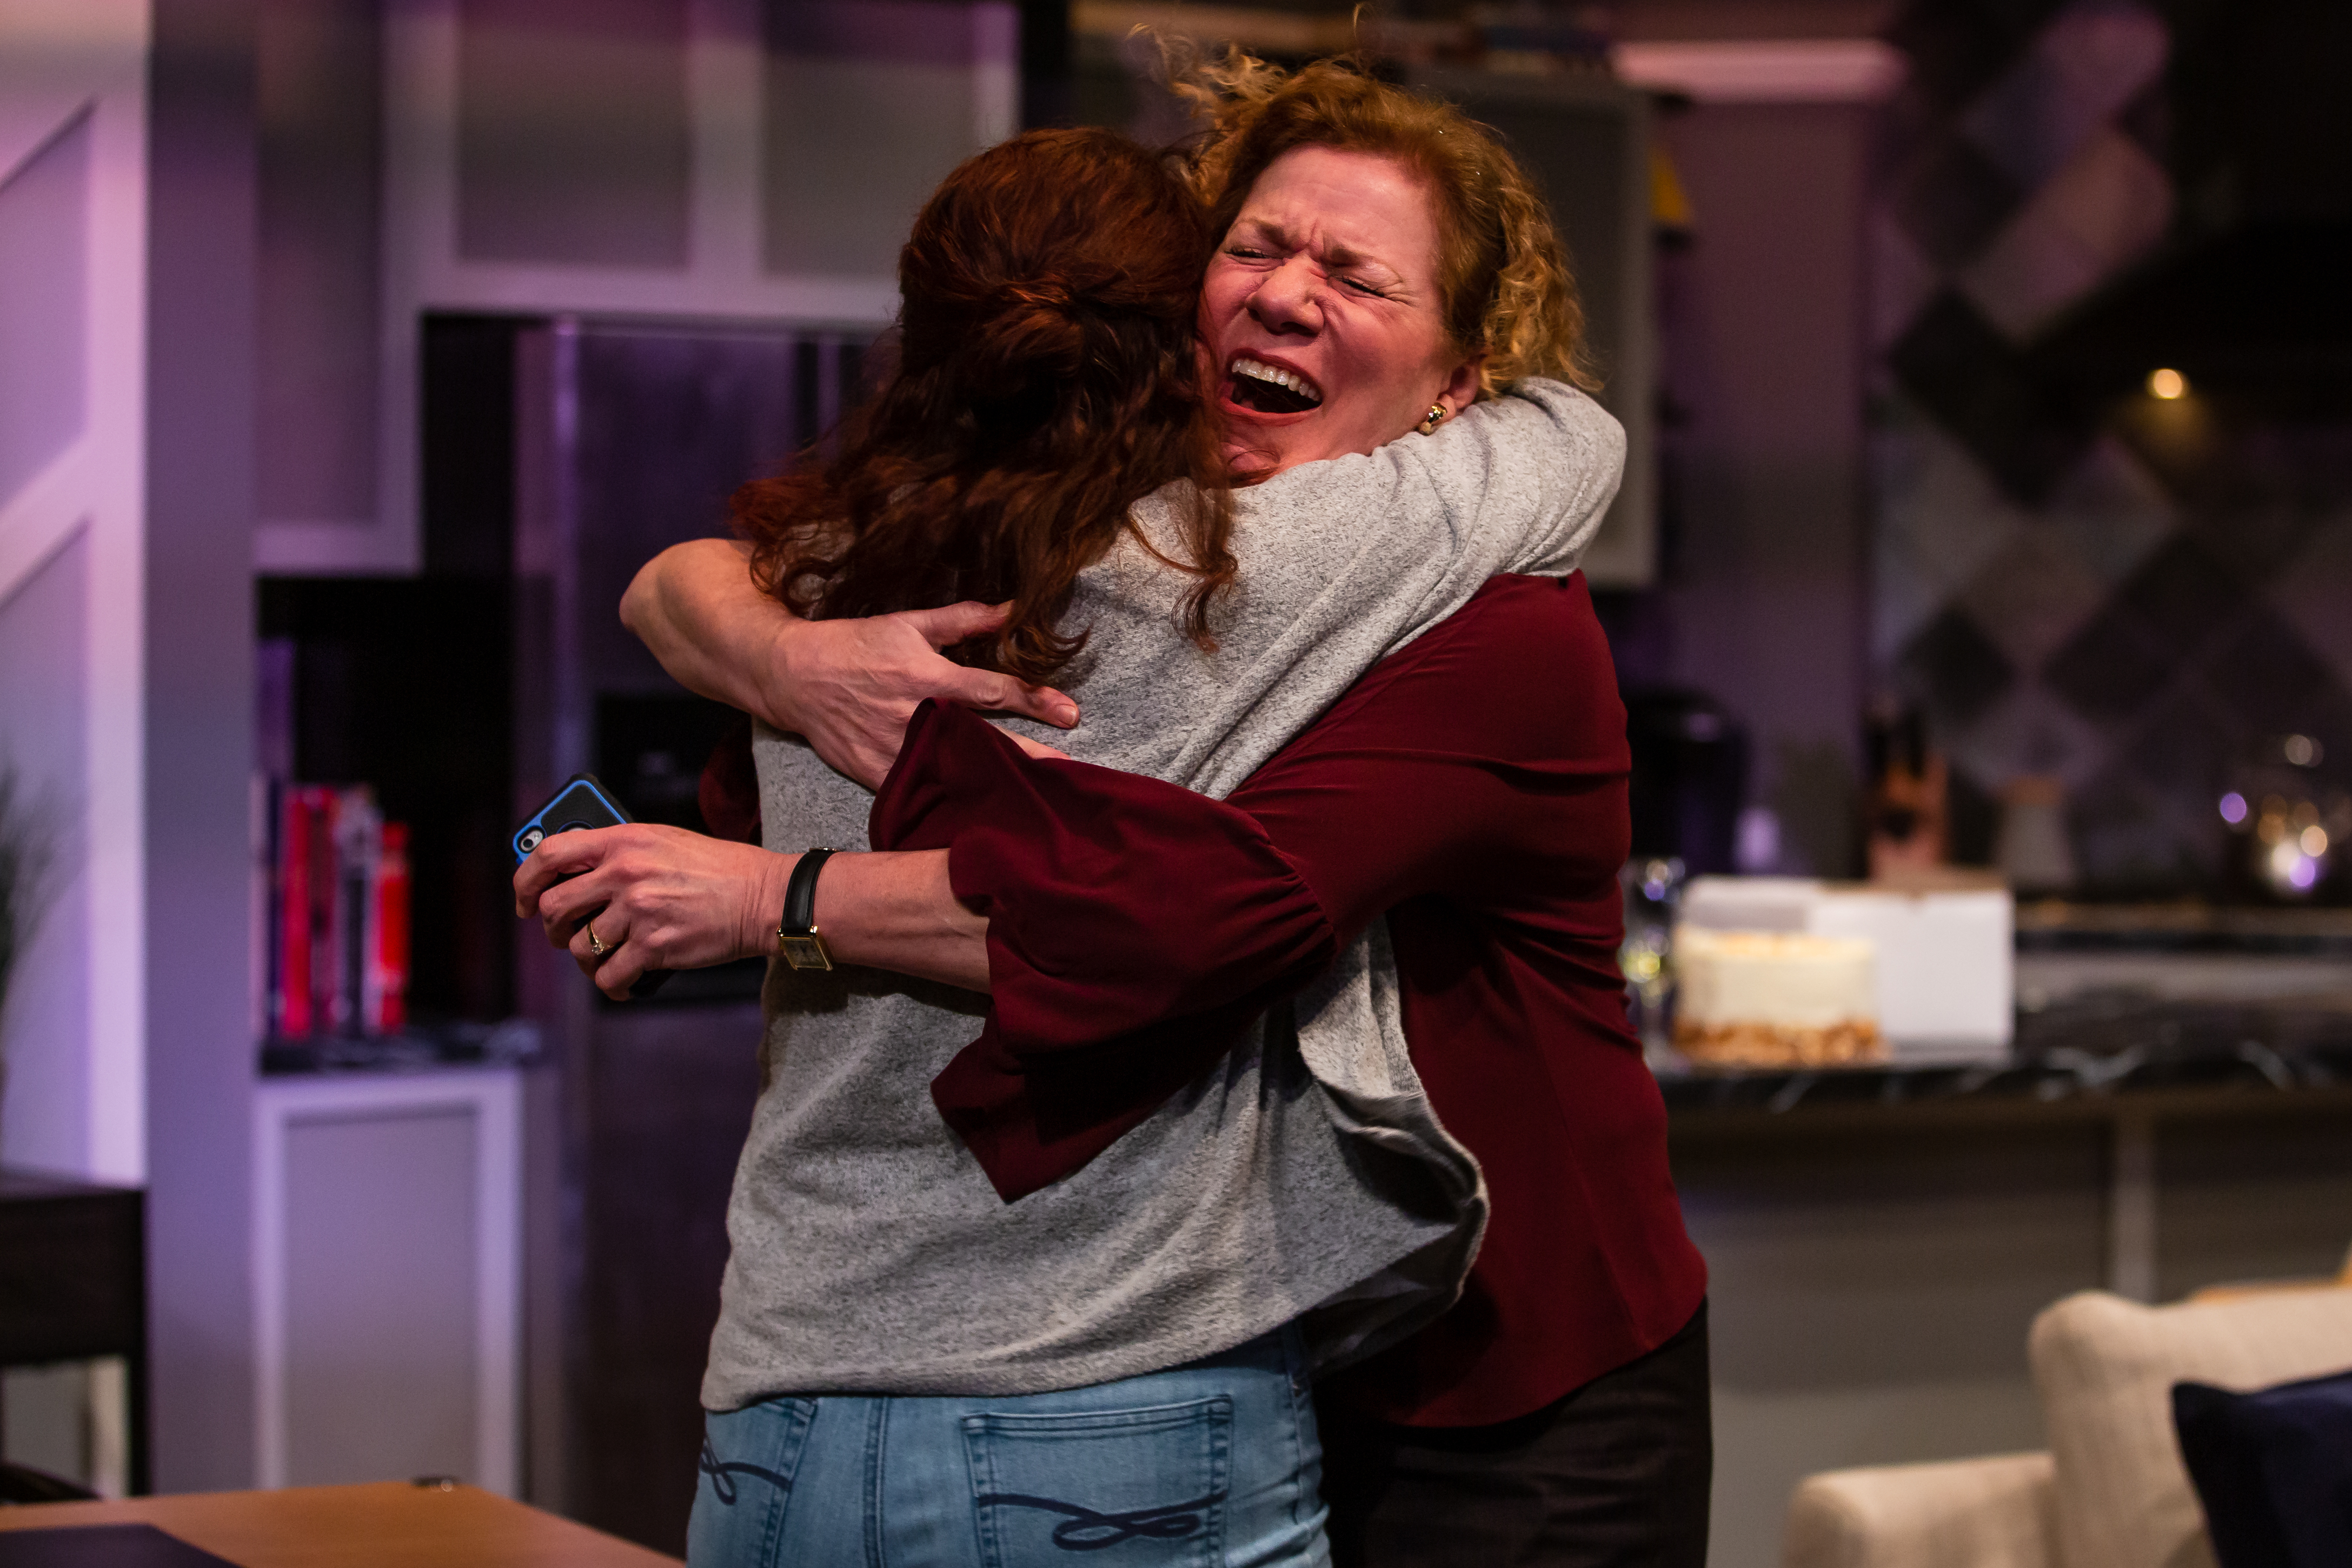 Two curly-haired women hug intensely. 